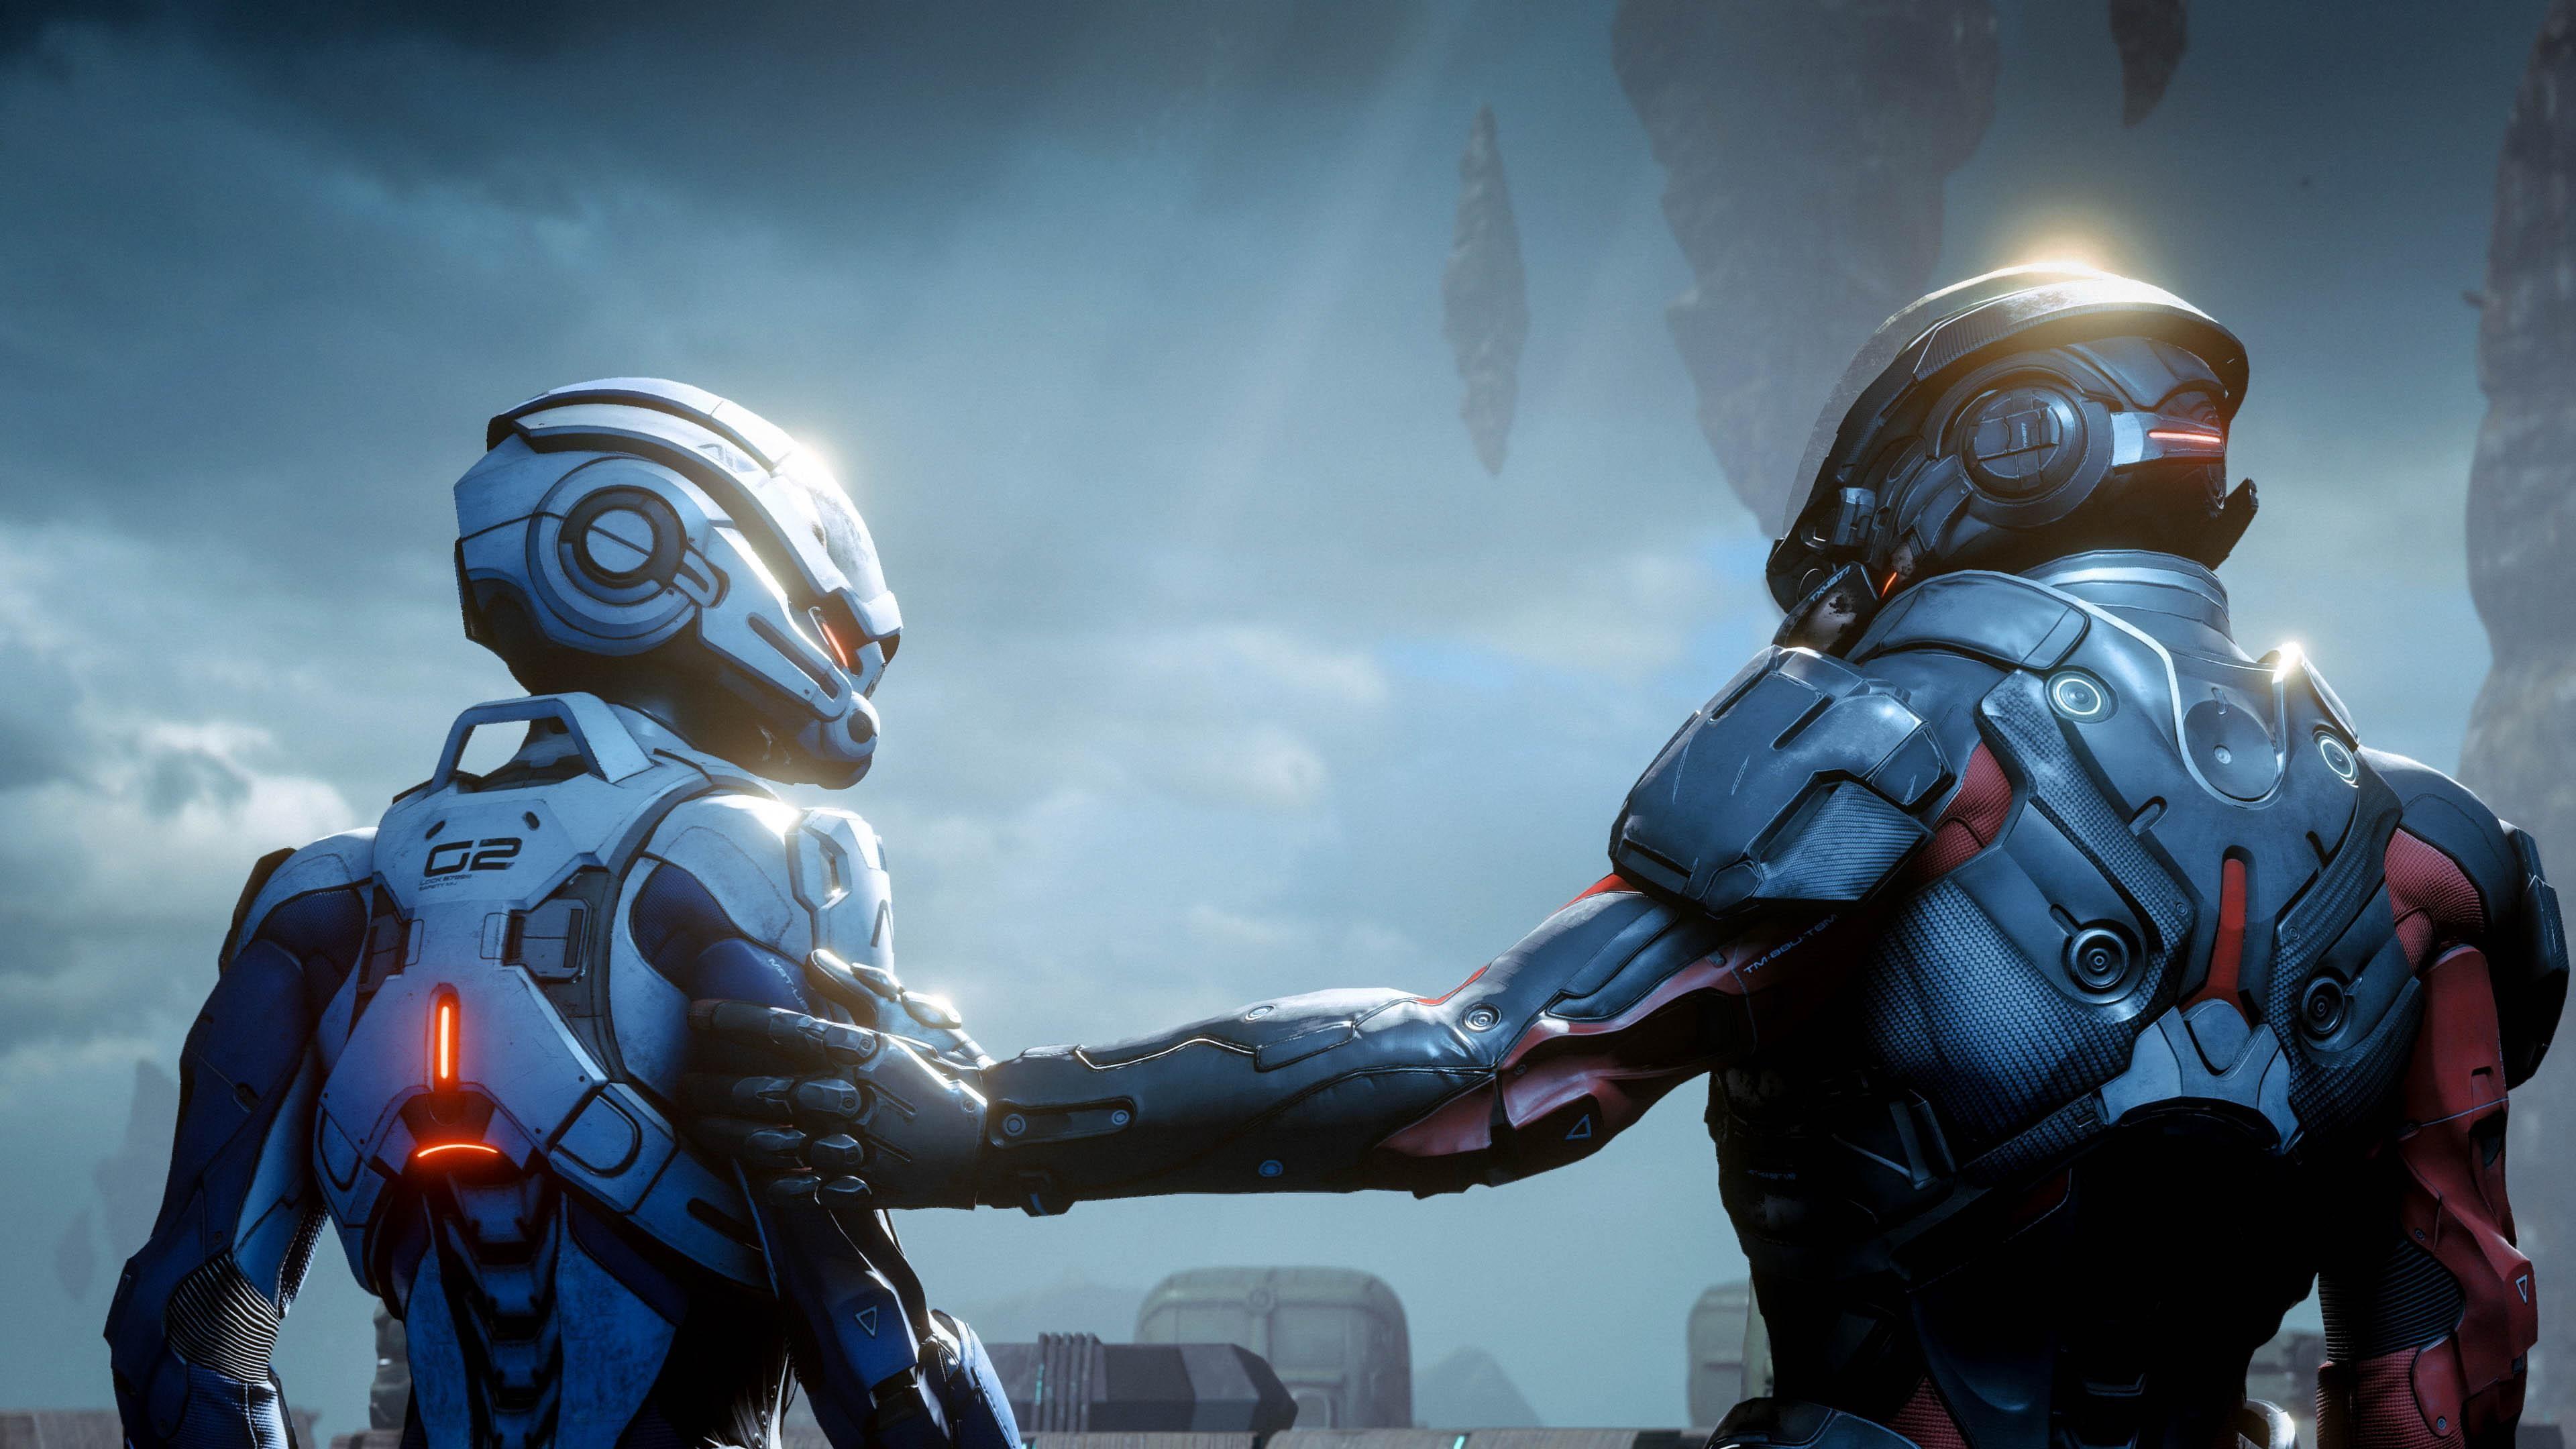 Mass Effect Andromeda 4k Wallpapers Top Free Mass Effect Andromeda 4k Backgrounds 1304